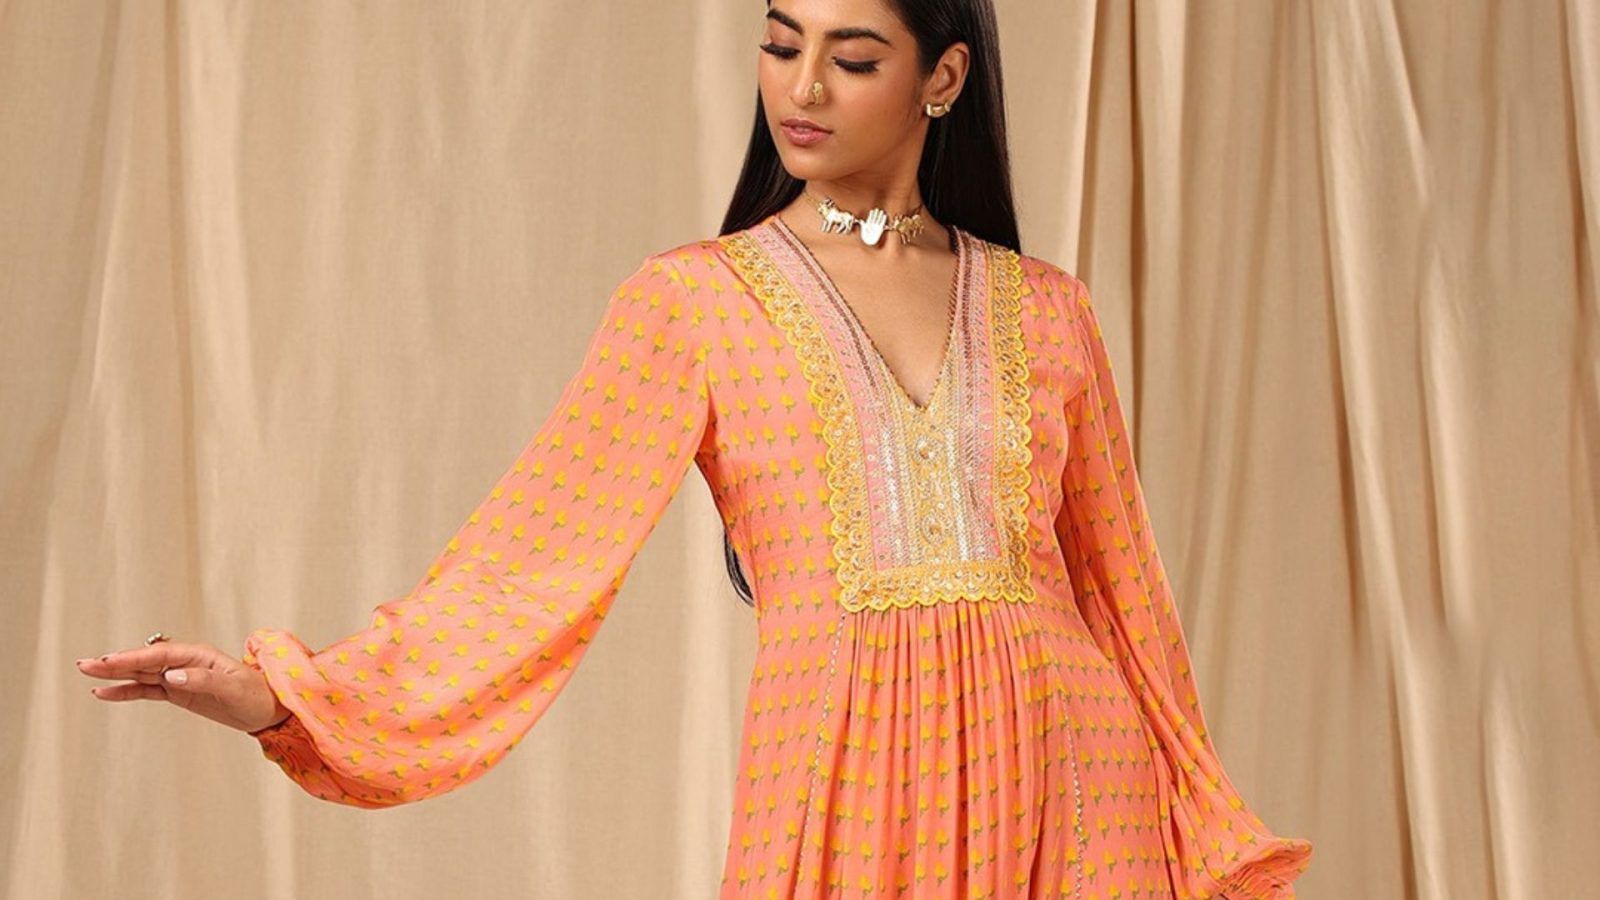 Velvour - Pakistani Kurti Designs For Girls, Our own Stitching, Branded By  Velvour Best Material For summer Available 4 years To 13 Year Shop Online  #girls #kids #Velvour #kurti #branded #NewArrival #handmade | Facebook